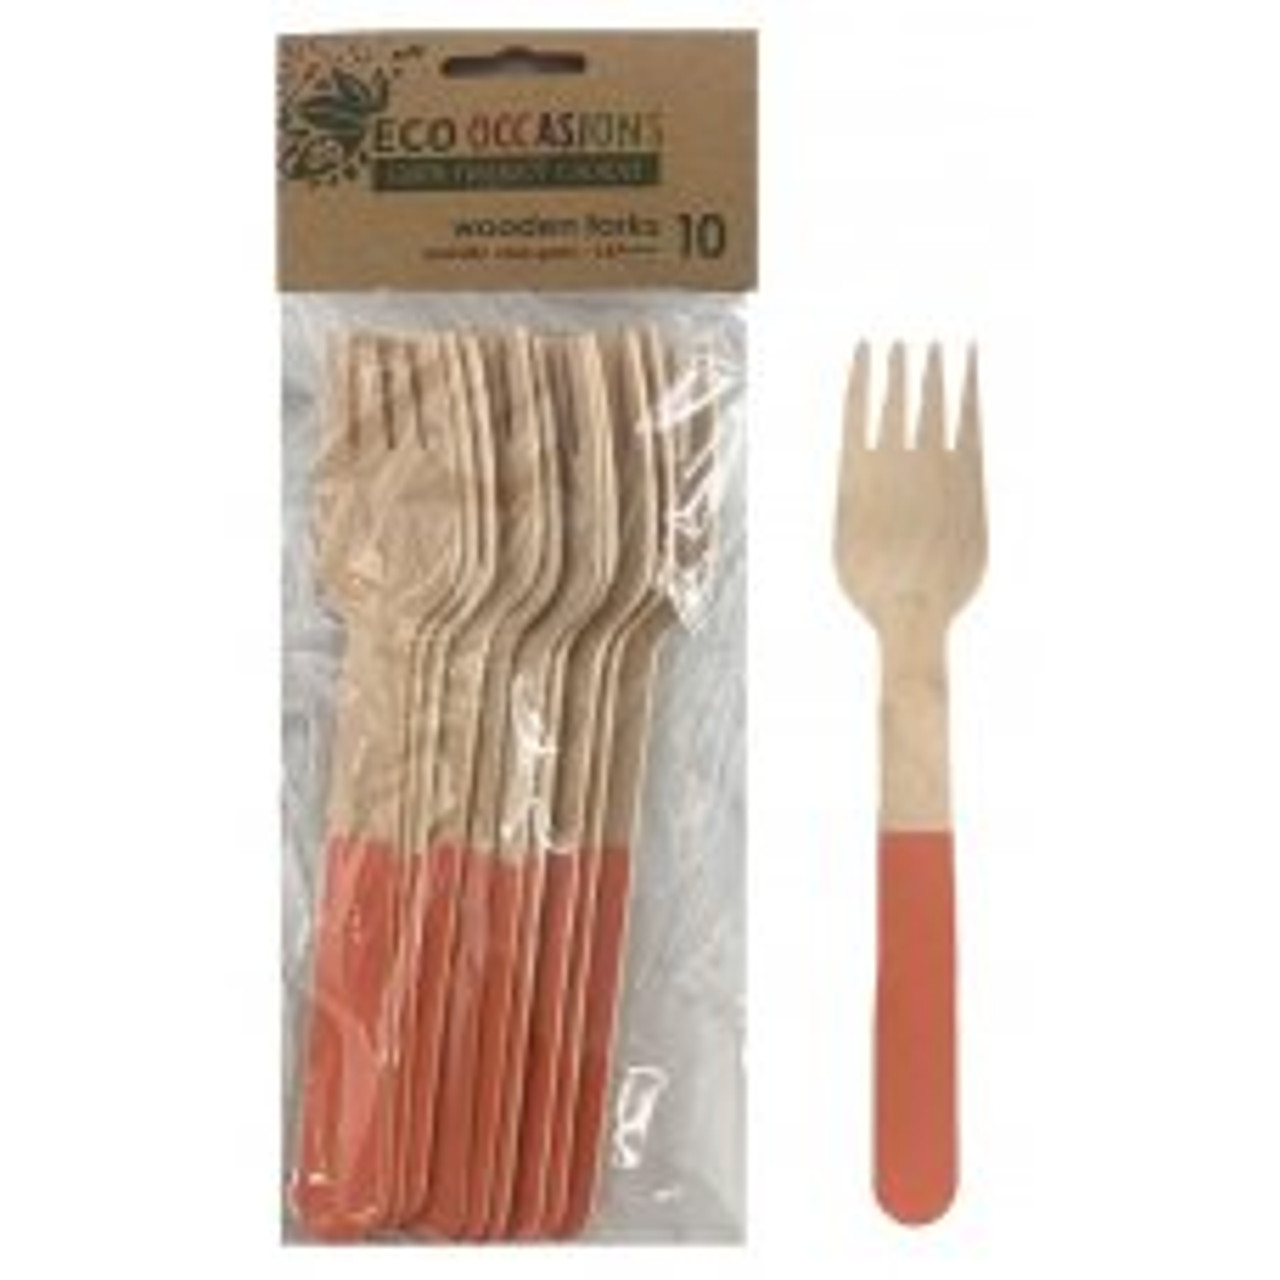 ECO WOODEN CUTLERY ROSE GOLD  FORKS P10